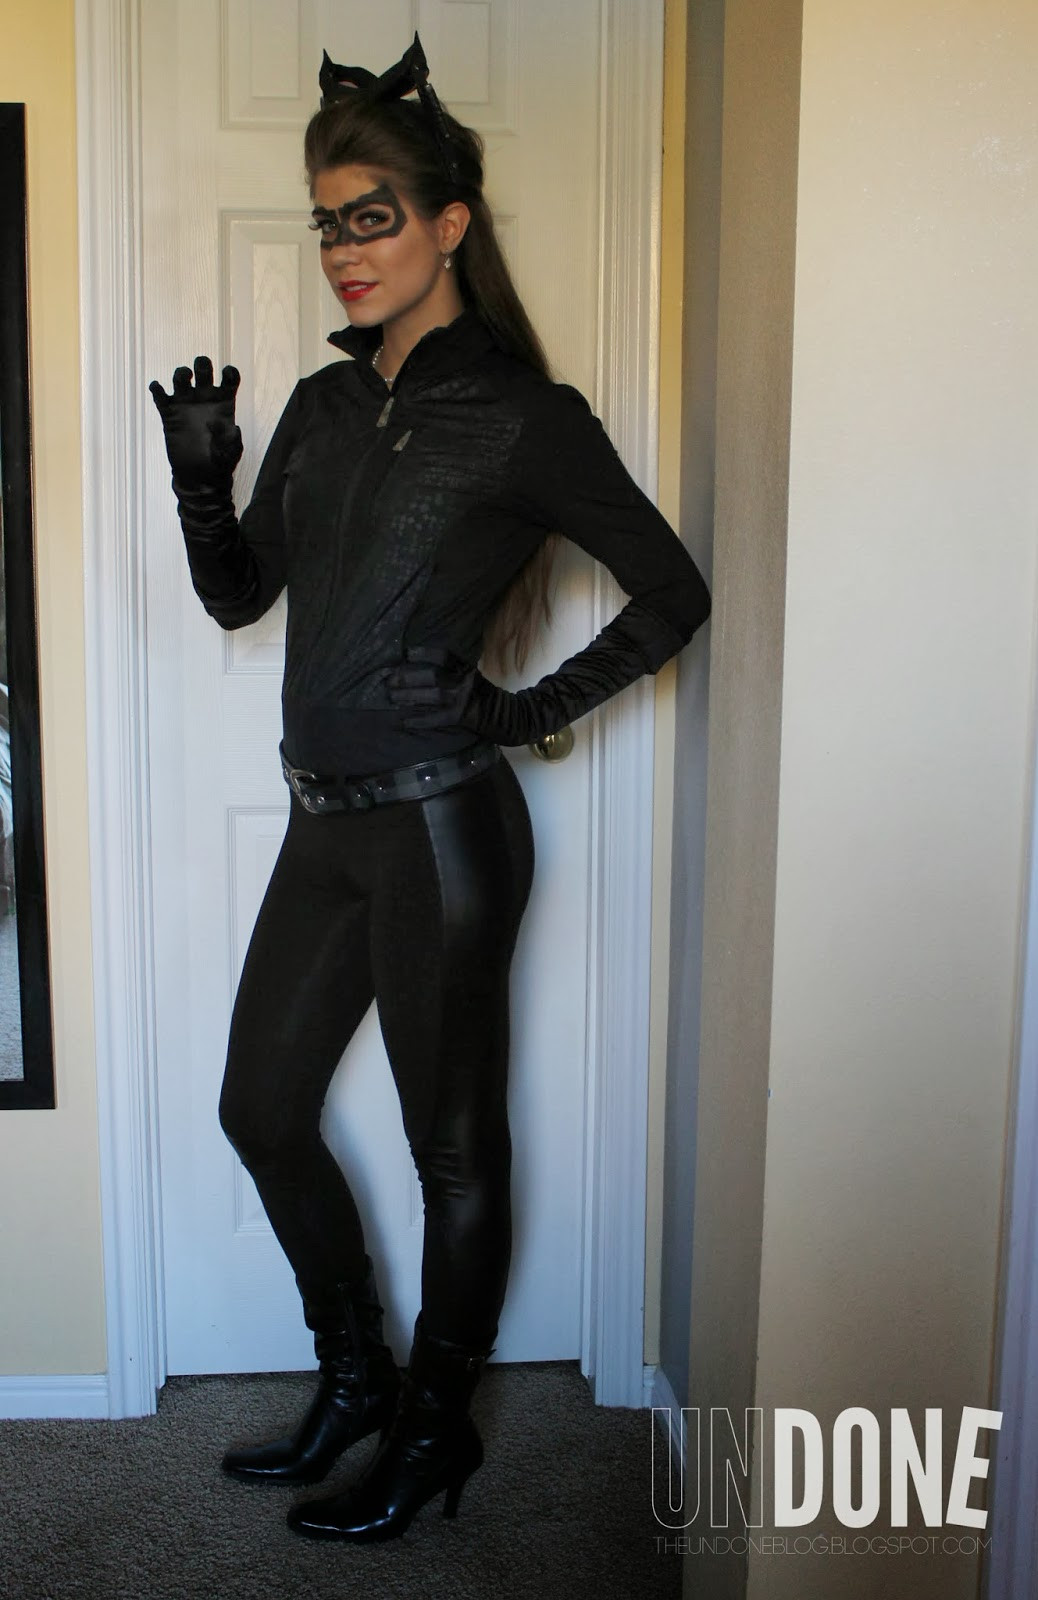 DIY Catwoman Costume
 My Costume So Without Further Ado I Would Like To Present